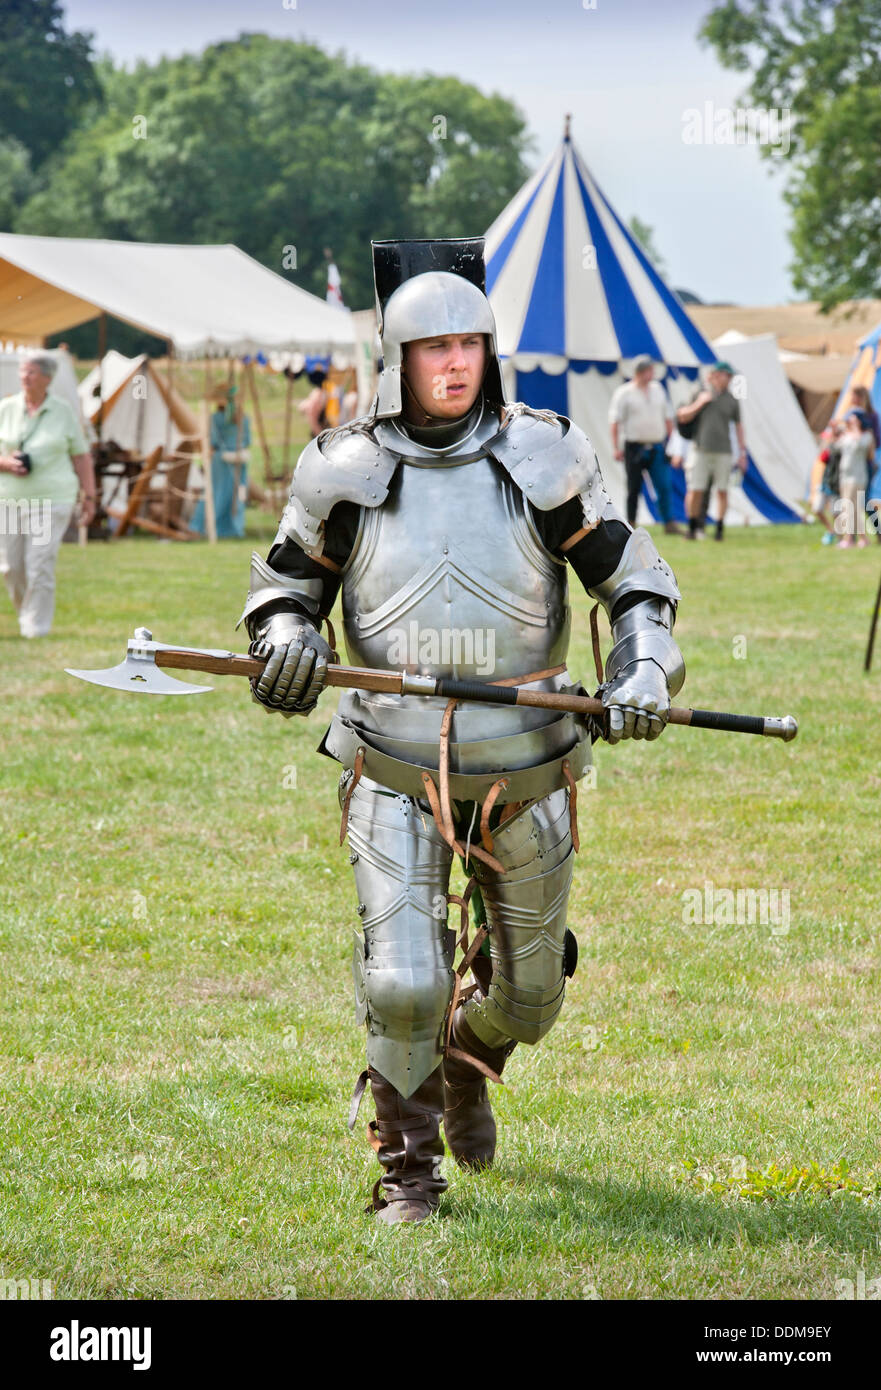 The 'Berkeley Skirmish' medieval reinactments at Berkeley Castle near Gloucester where the 500th anniversary of the battle of Fl Stock Photo